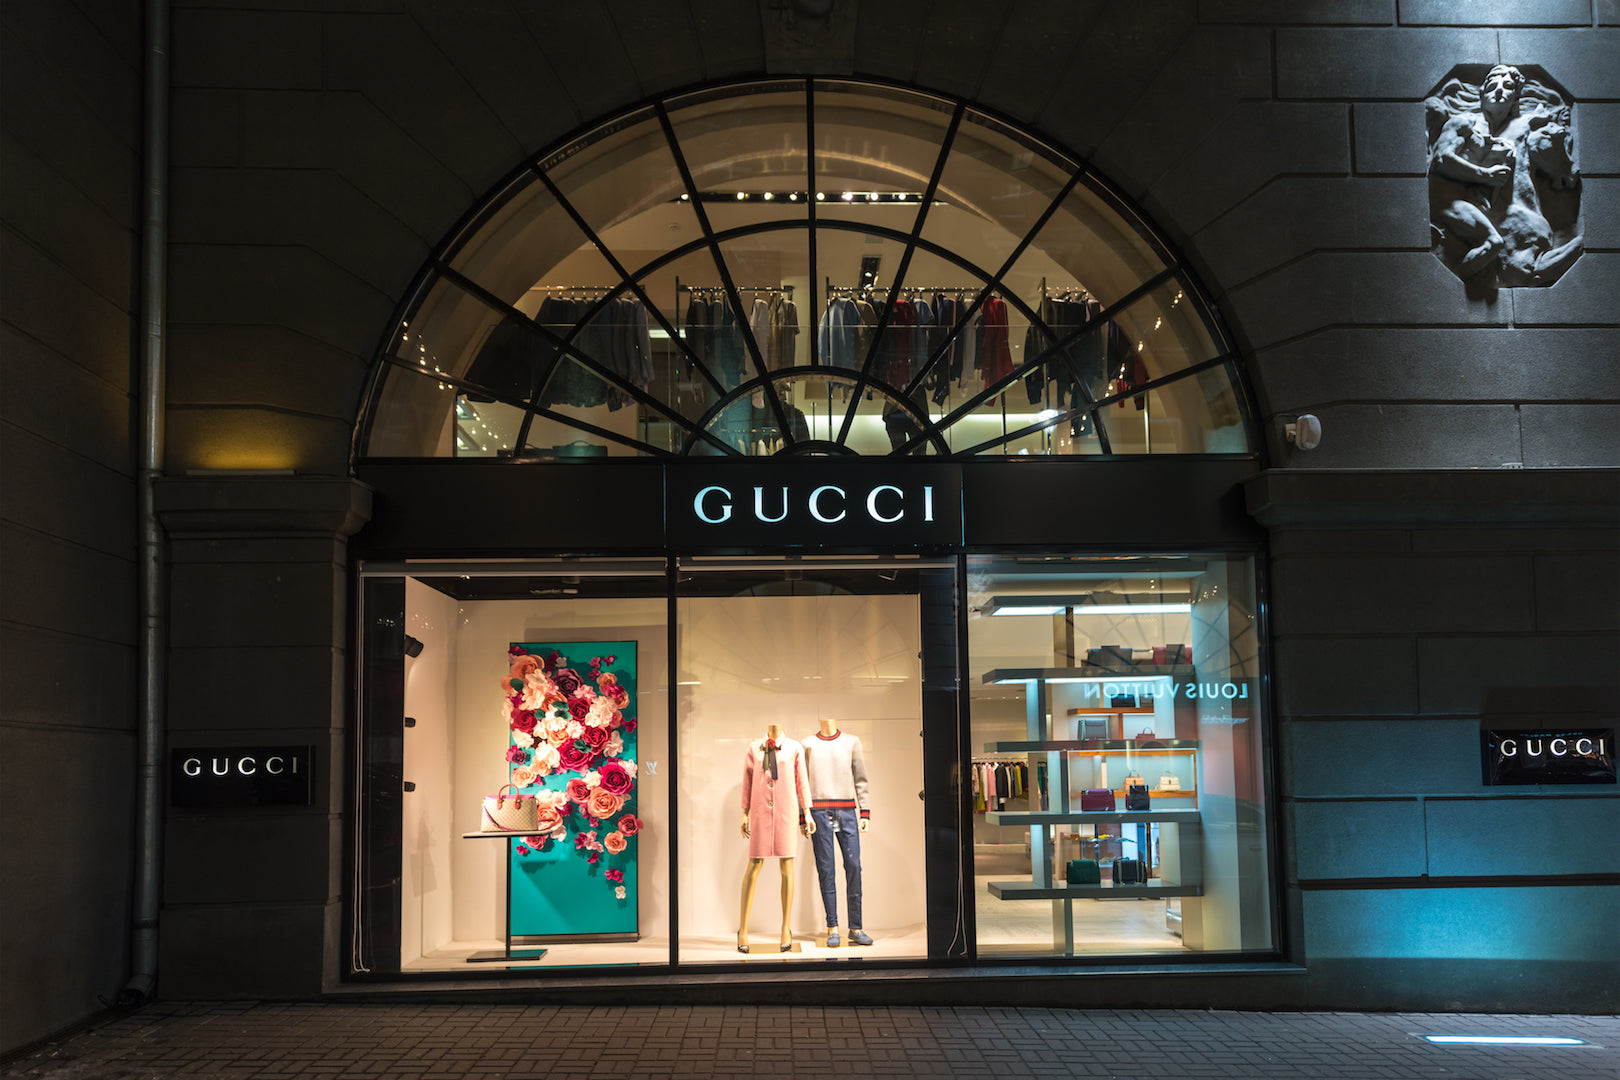 Gucci Paper Flower window display - Image 1